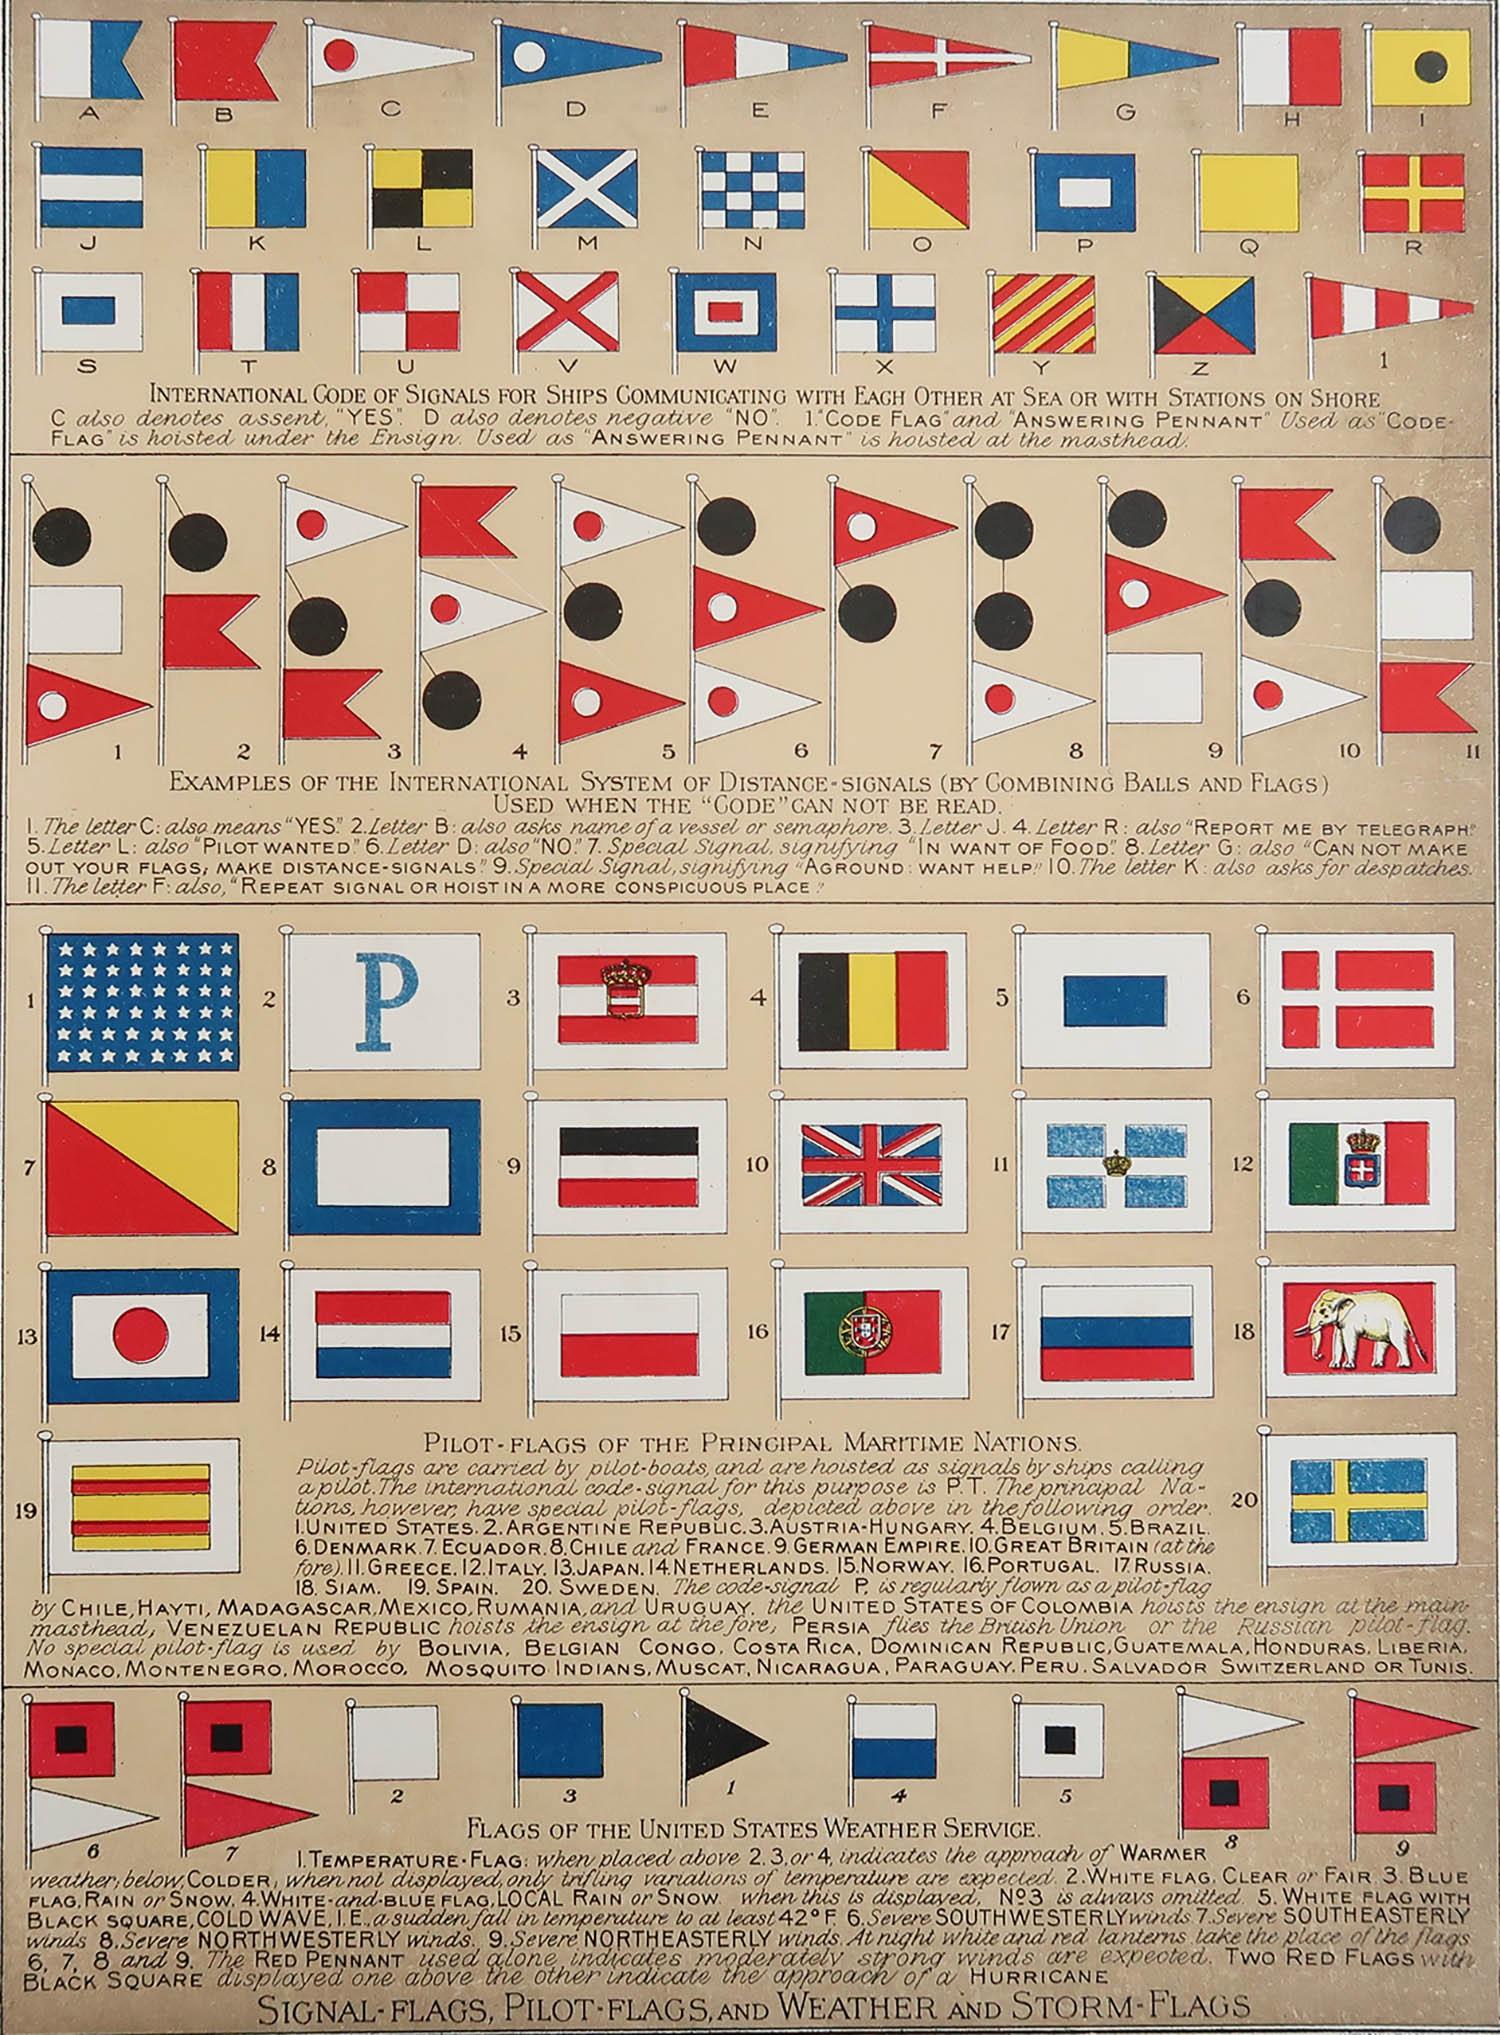 Fabulous print of marine flags.

American Lithographic Company, New York

Published C.1900

Unframed.

Repair to a minor edge tear top left margin







